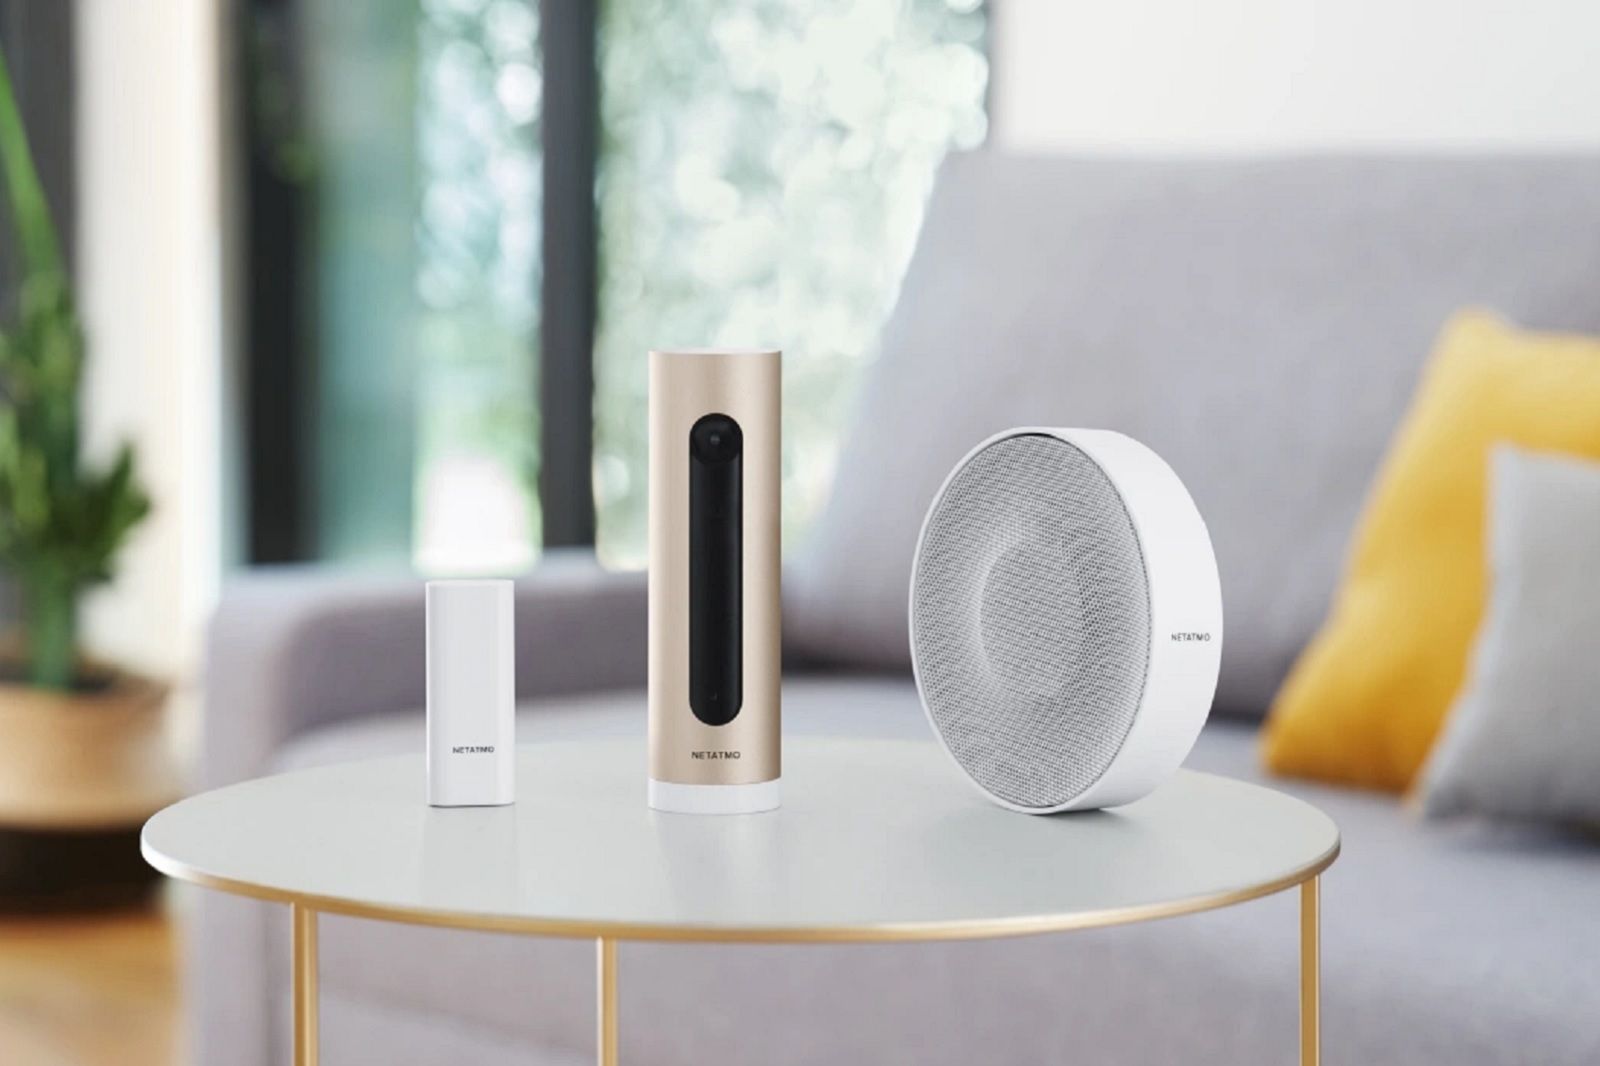 Netatmo launches smart home security system with camera siren and sensors image 1